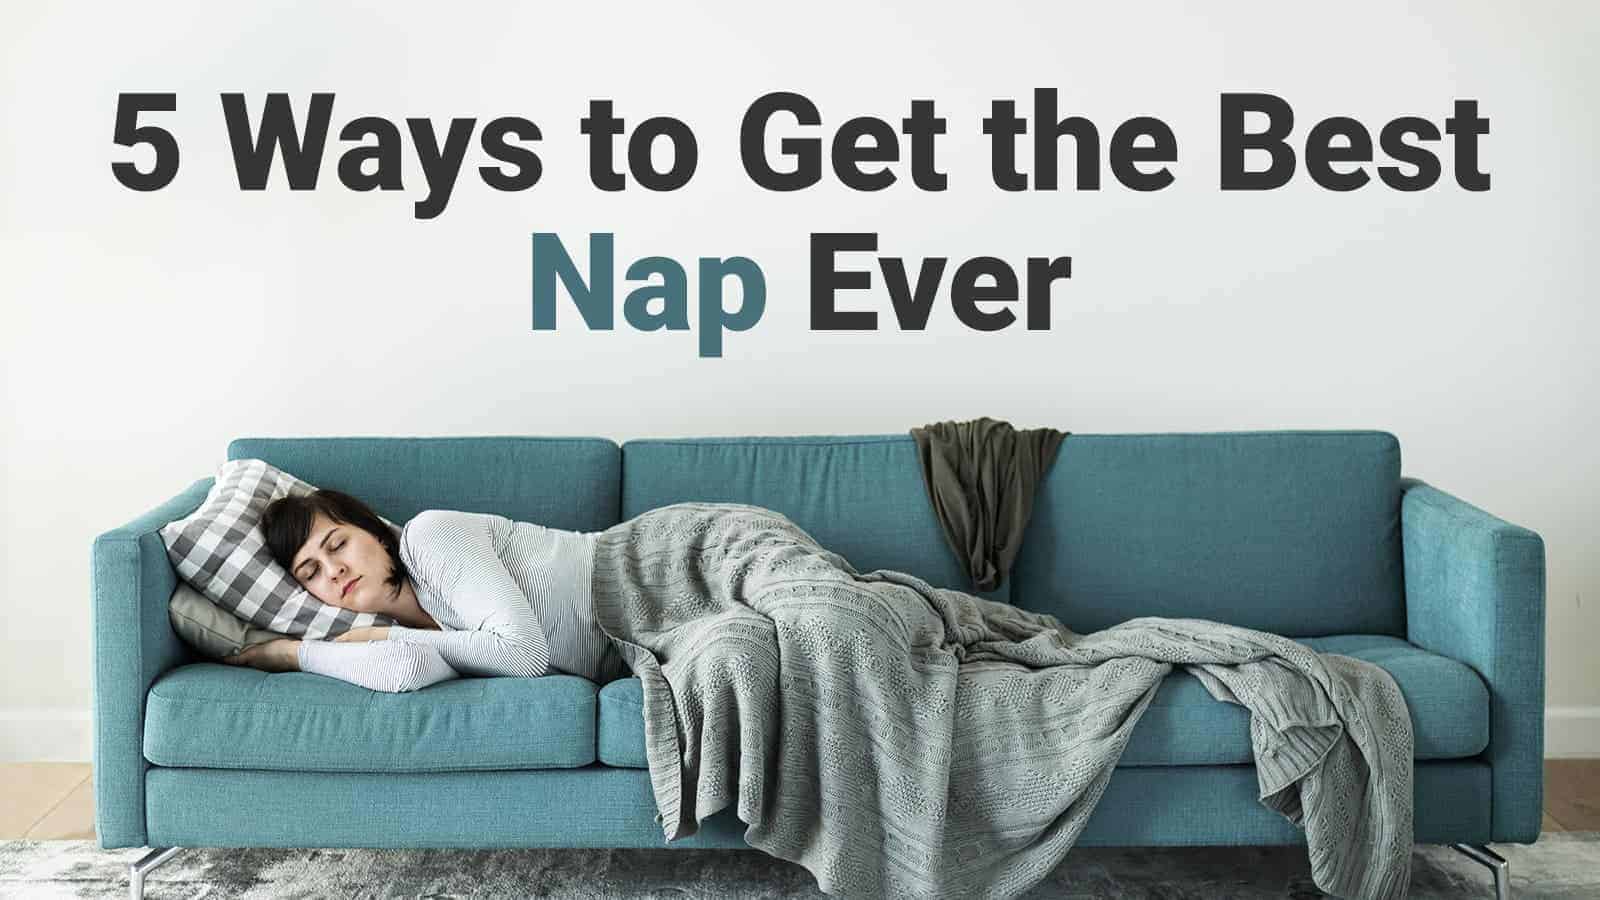 5 Ways to Get the Best Nap Ever